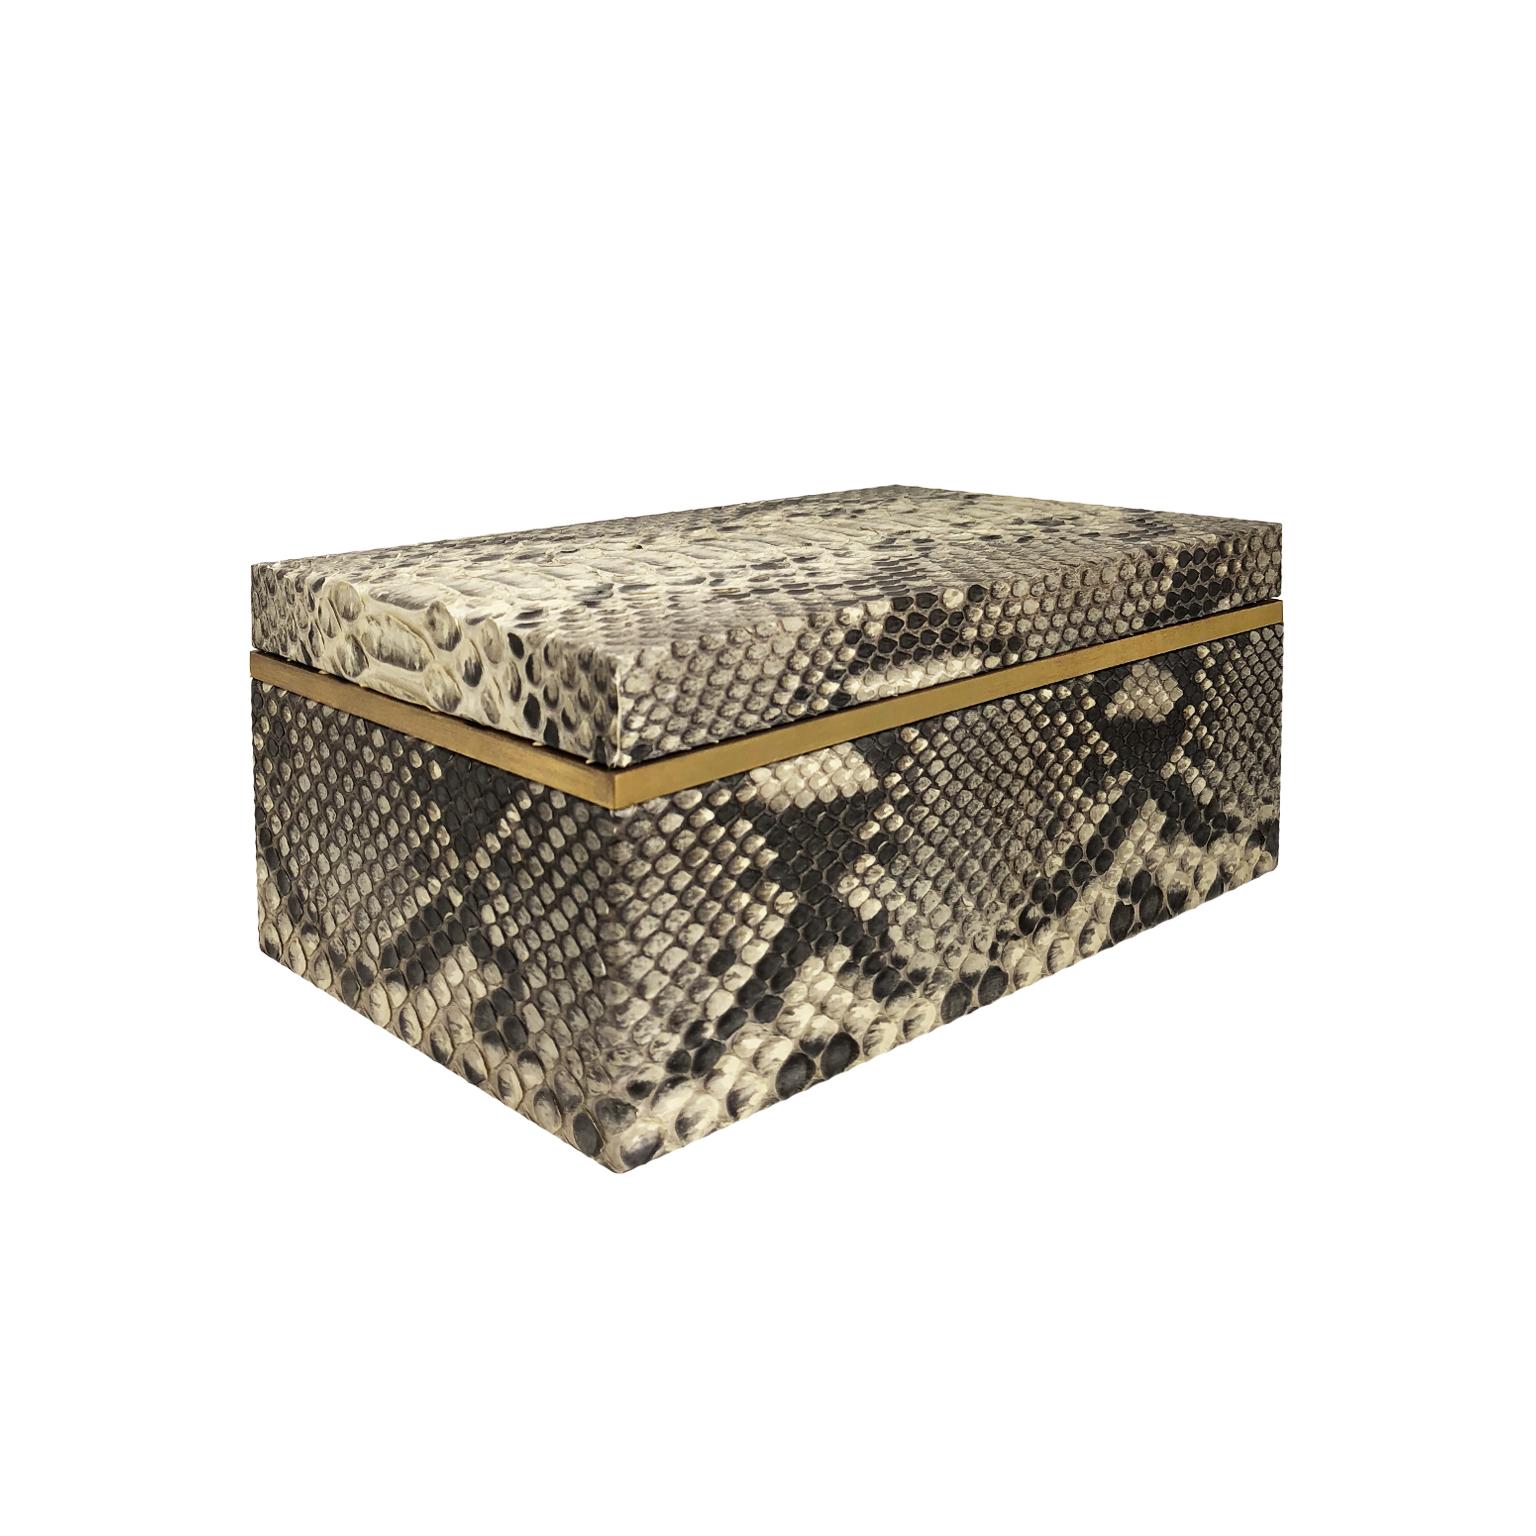 Flair Home collection handmade small rectangular natural python box with brass banding and brass and suede interior.